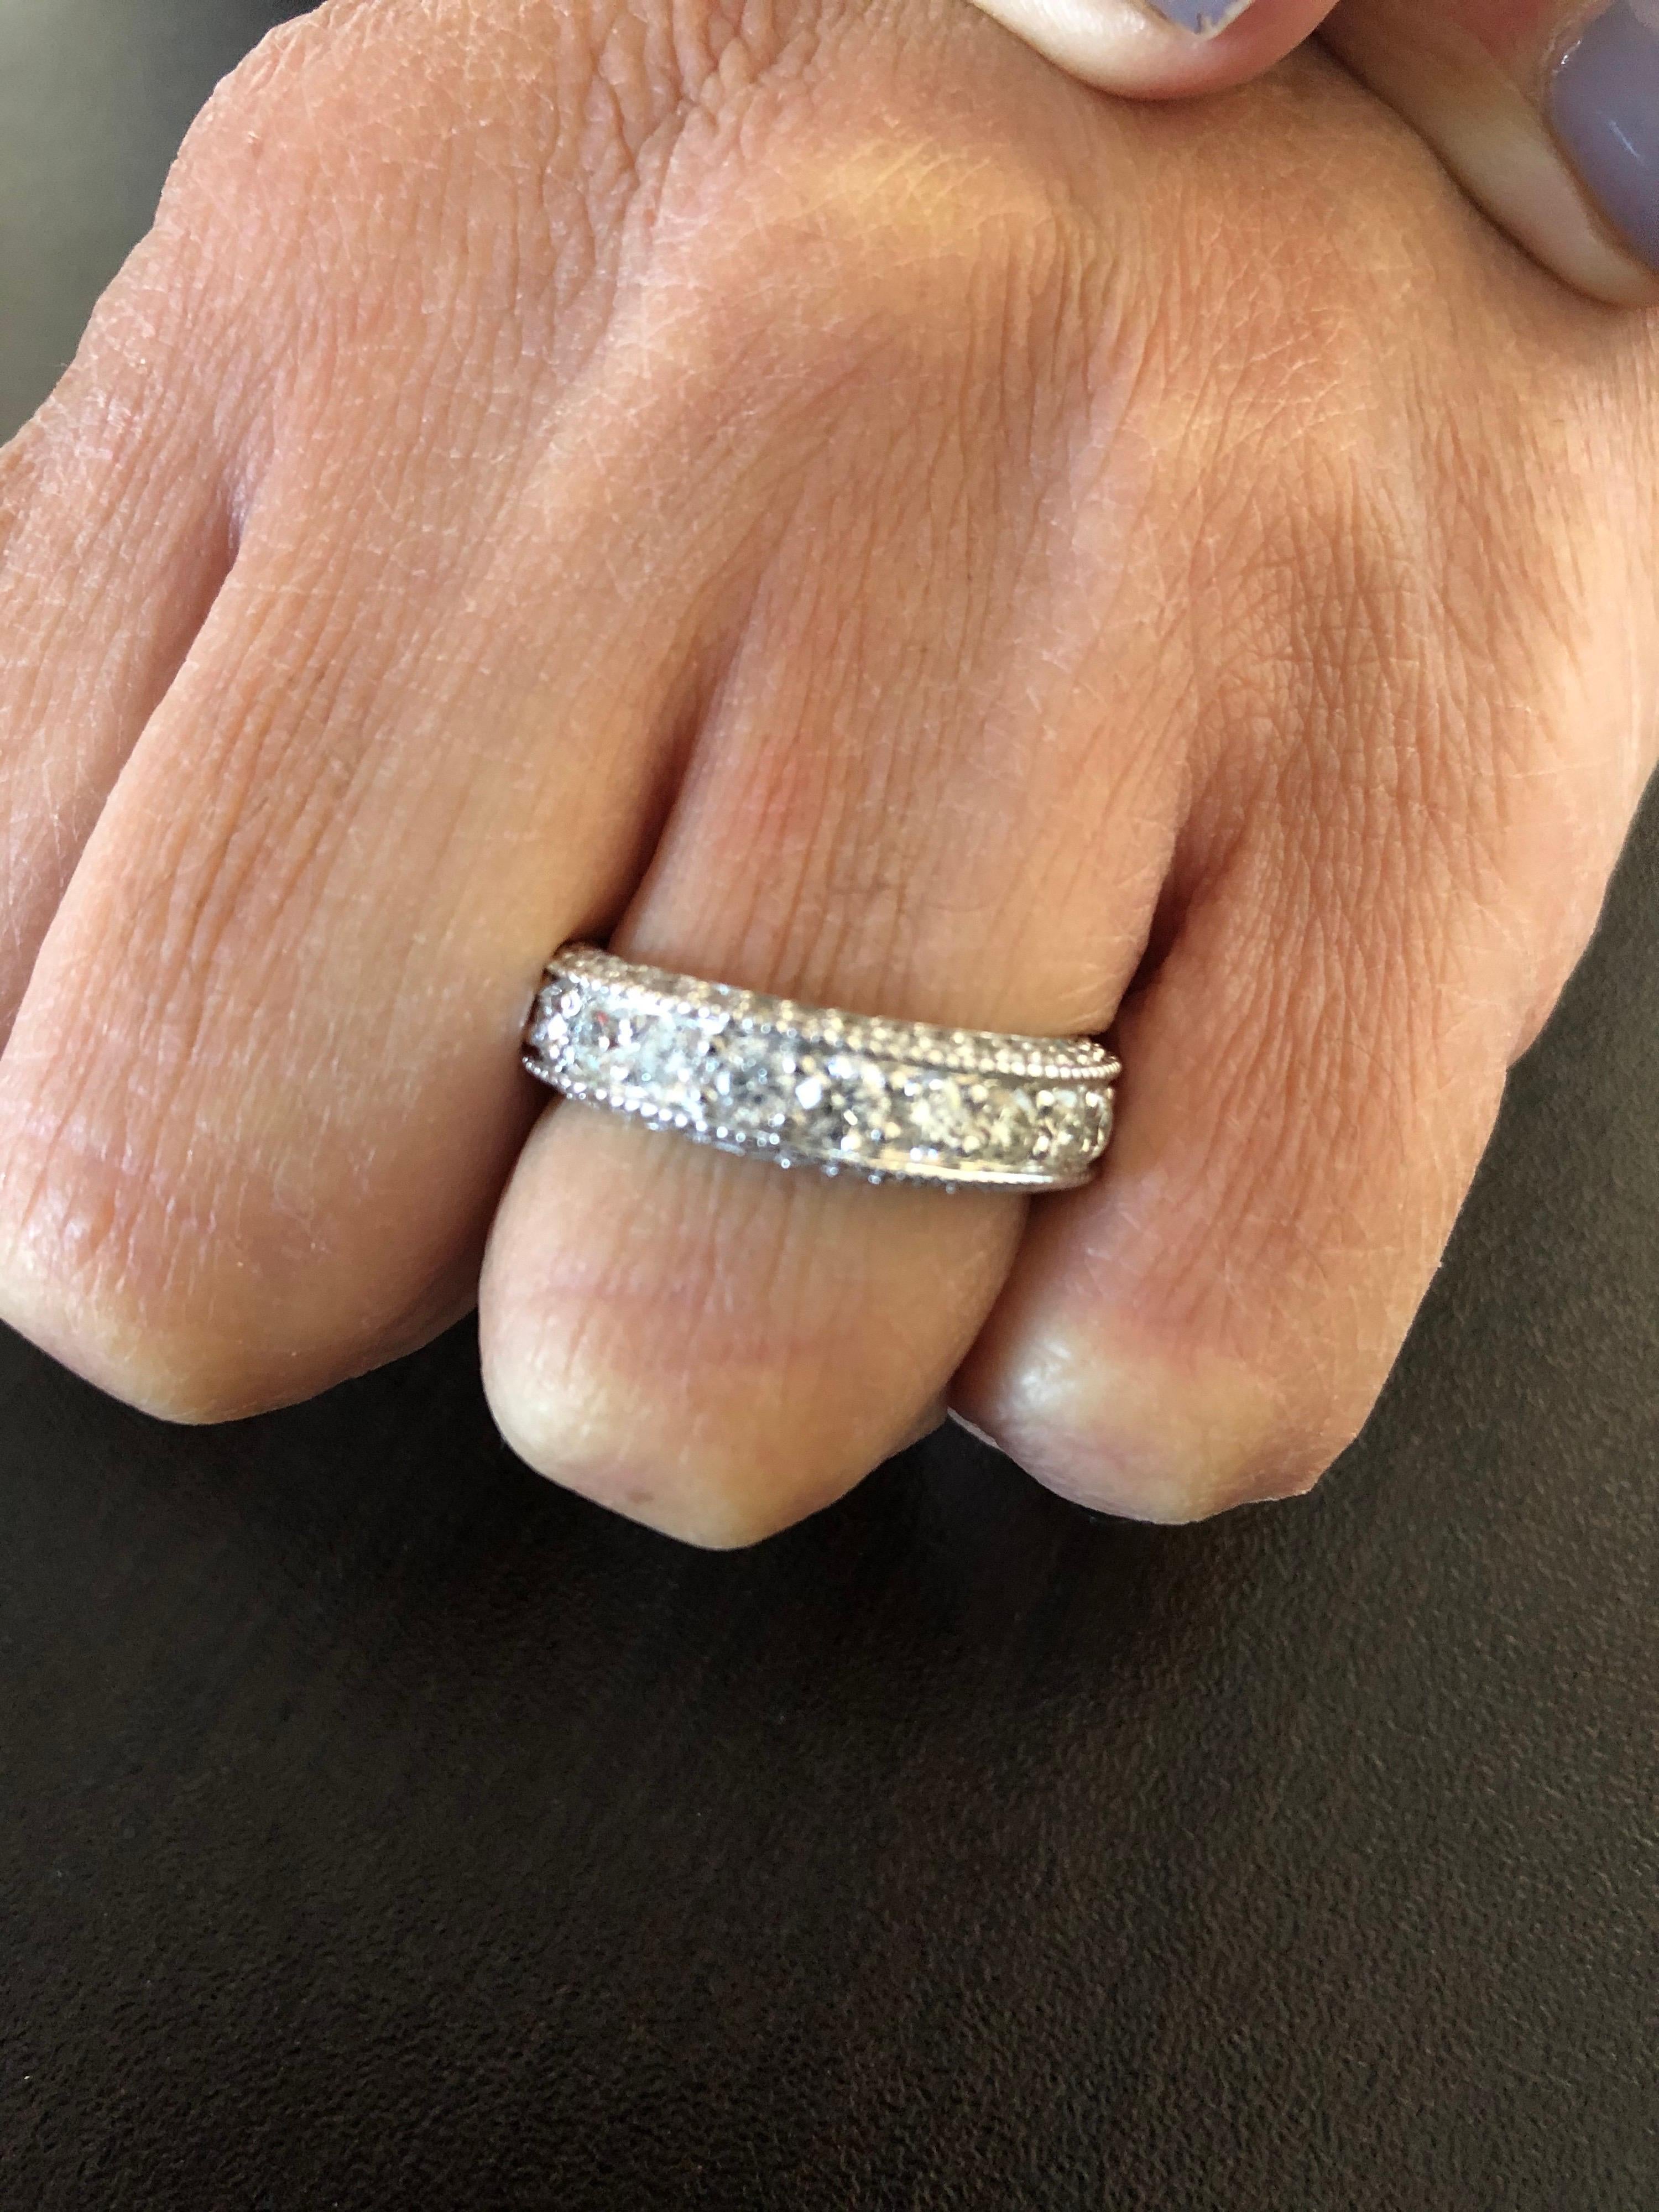 Diamond Eternity ring set in 14K white gold with 3 rows of diamonds. In the middle of the band the ring is set with 0.10 carat stones. On the 2 sides of the ring the diamonds are set wit 0.02 carats. The total diamond weight is 3.20 carats. The